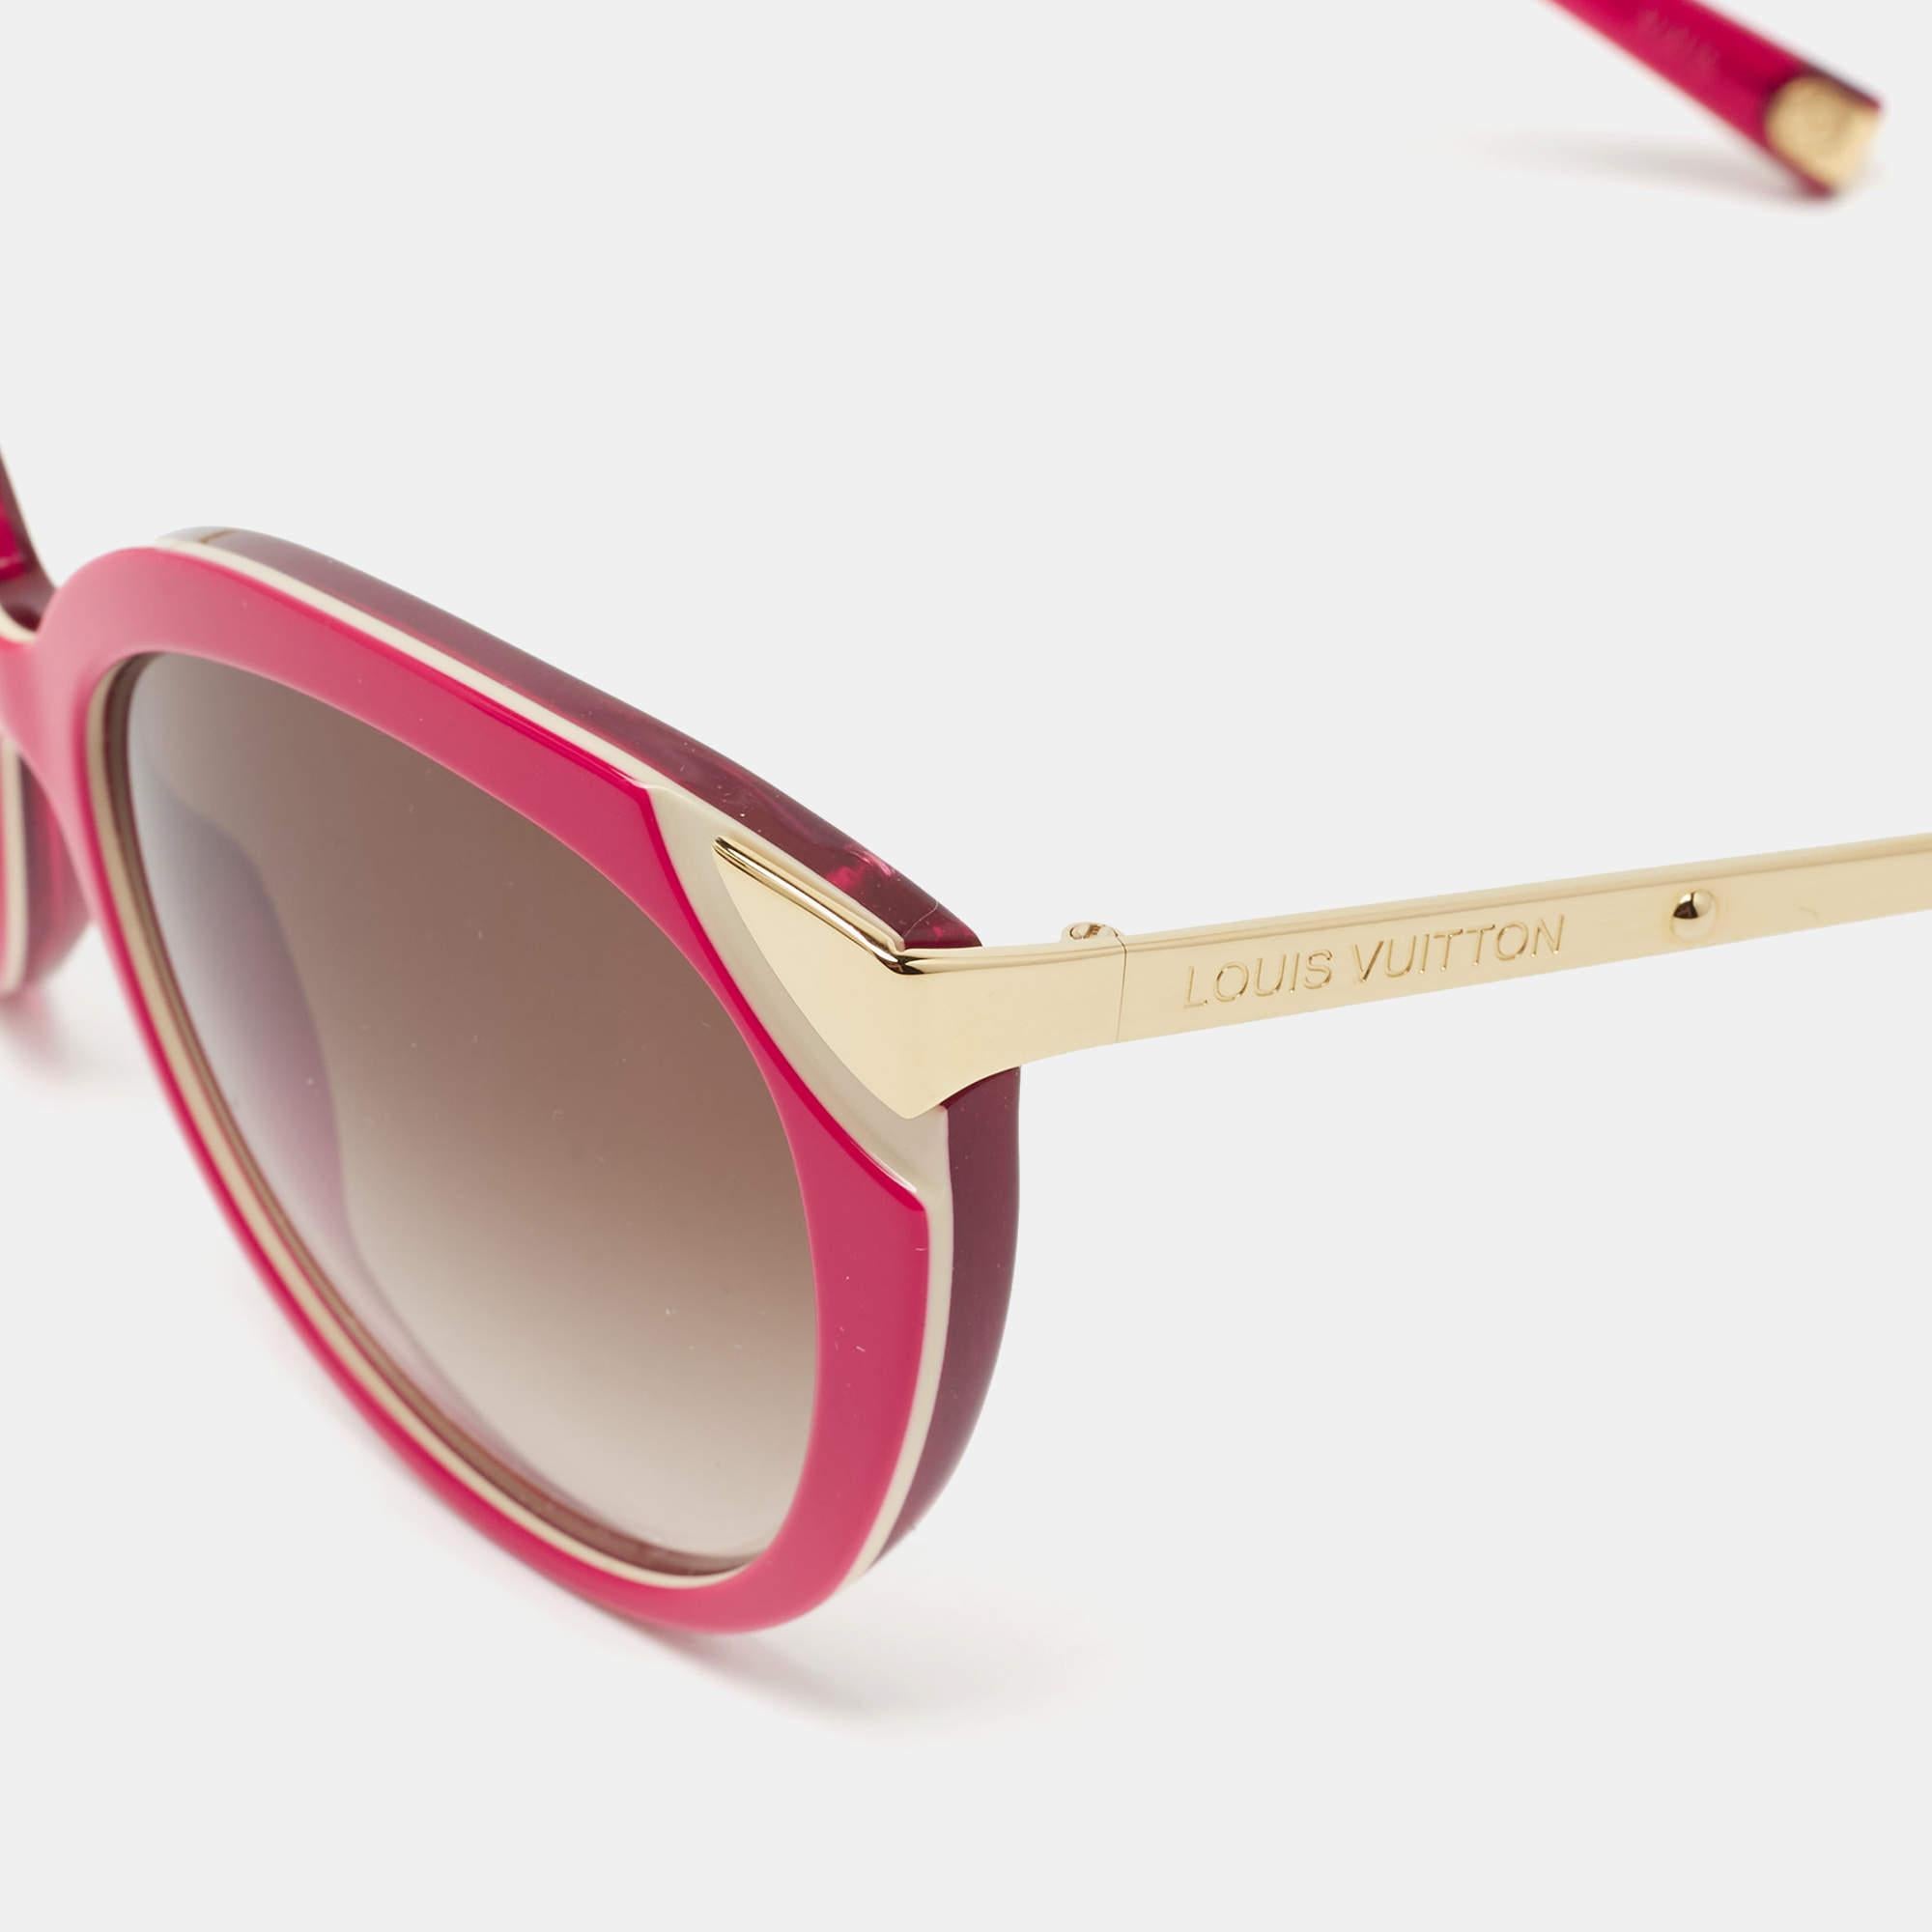 Embrace sunny days in full style with help from this pair of sunglasses by Louis Vuitton. Created with expertise, the luxe sunglasses feature a well-designed frame and high-grade lenses that are equipped to protect your eyes.

Includes: Original Case